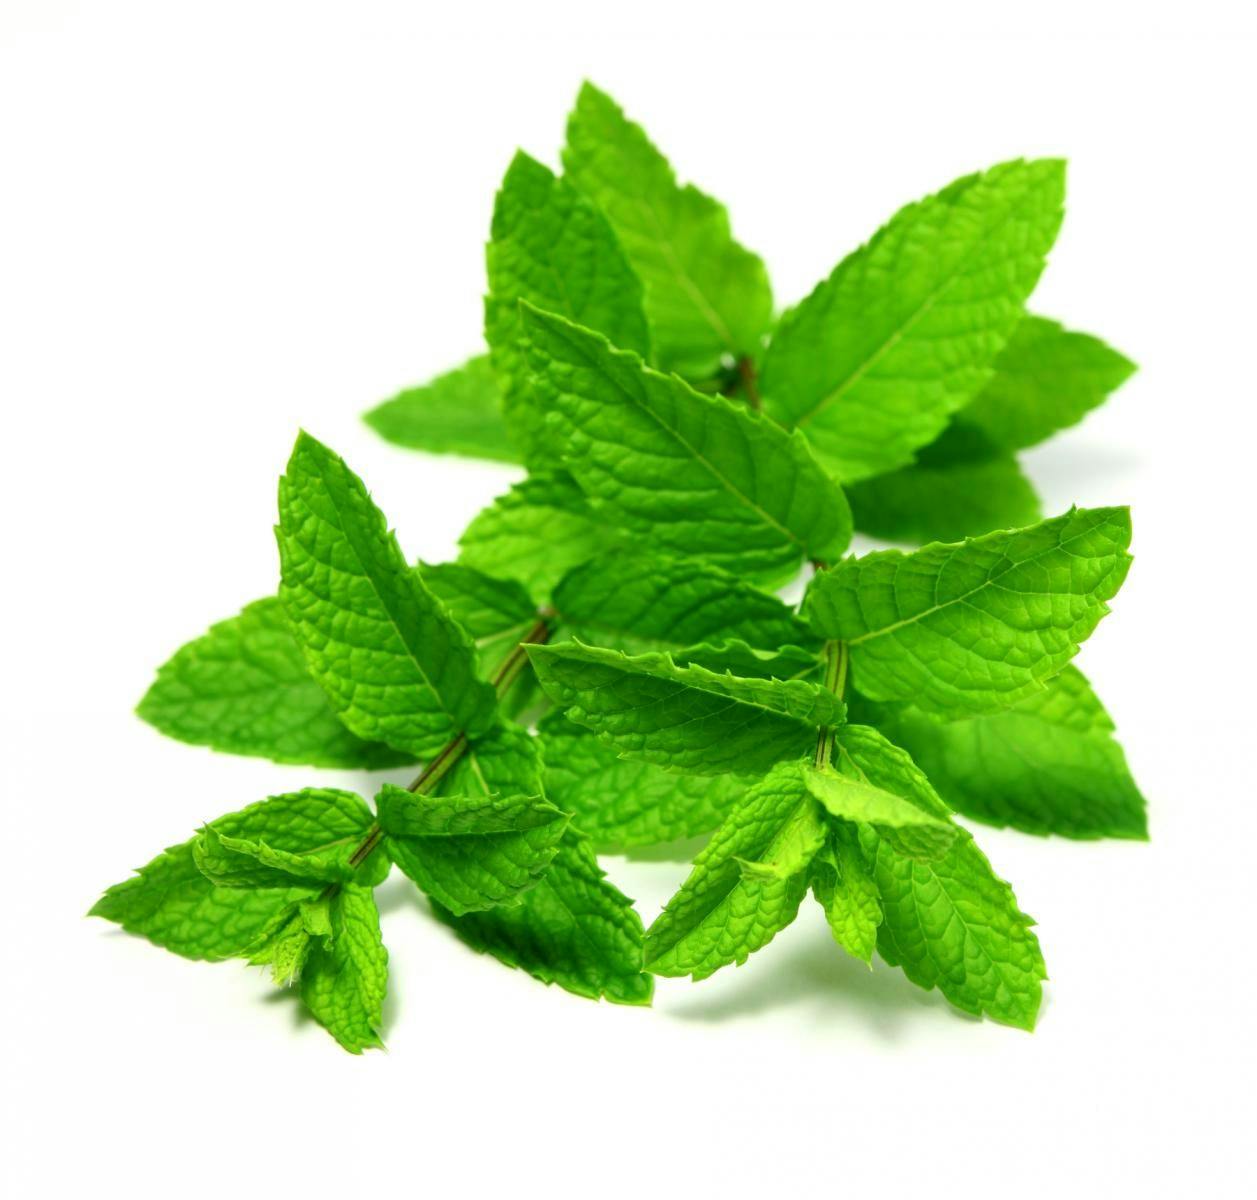 Spearmint Extract Improves Cognitive Performance?